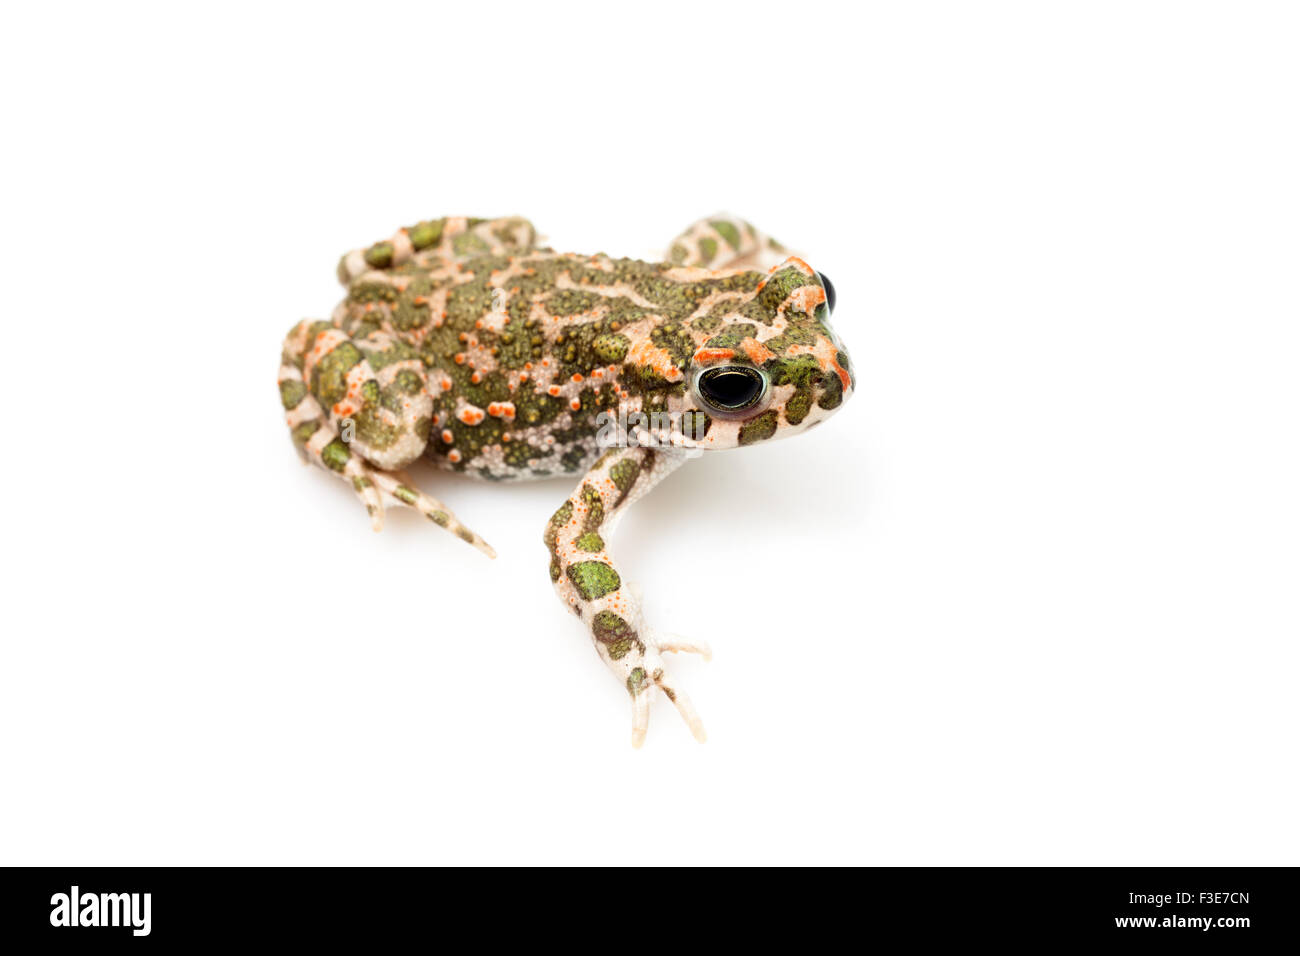 European green toad on a man's hand, close-up shot Stock Photo